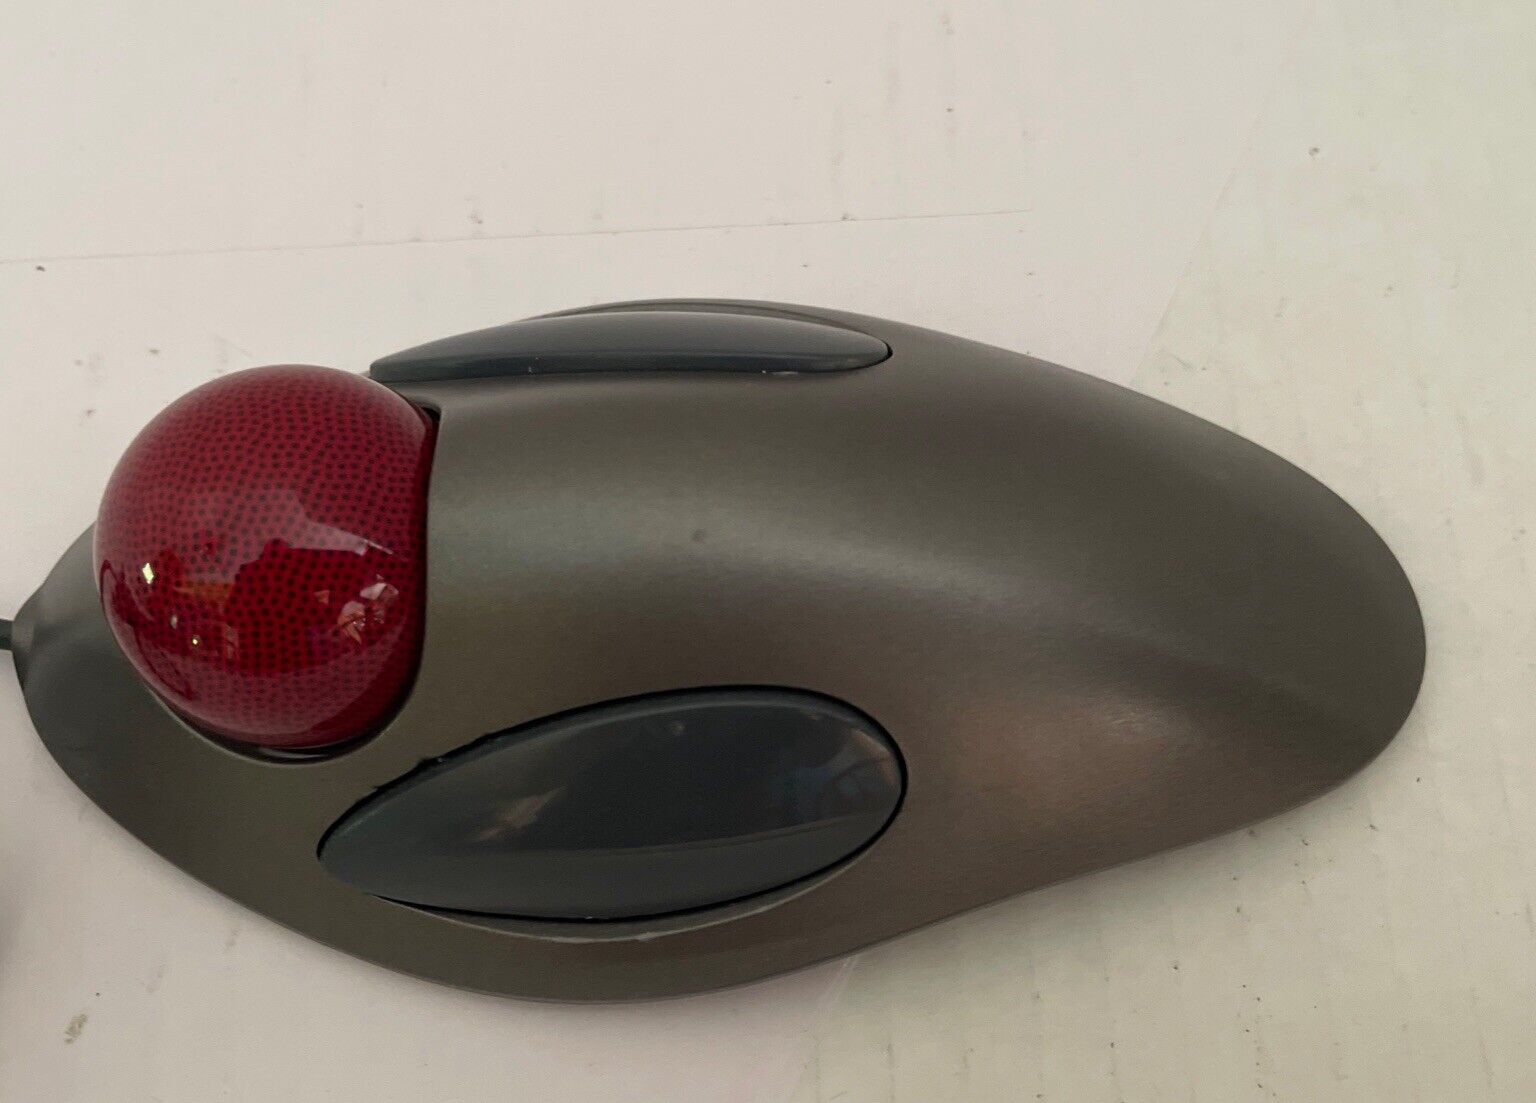 Logitech T-BB14 USB Wired Trackball Marble Mouse Tested & Works